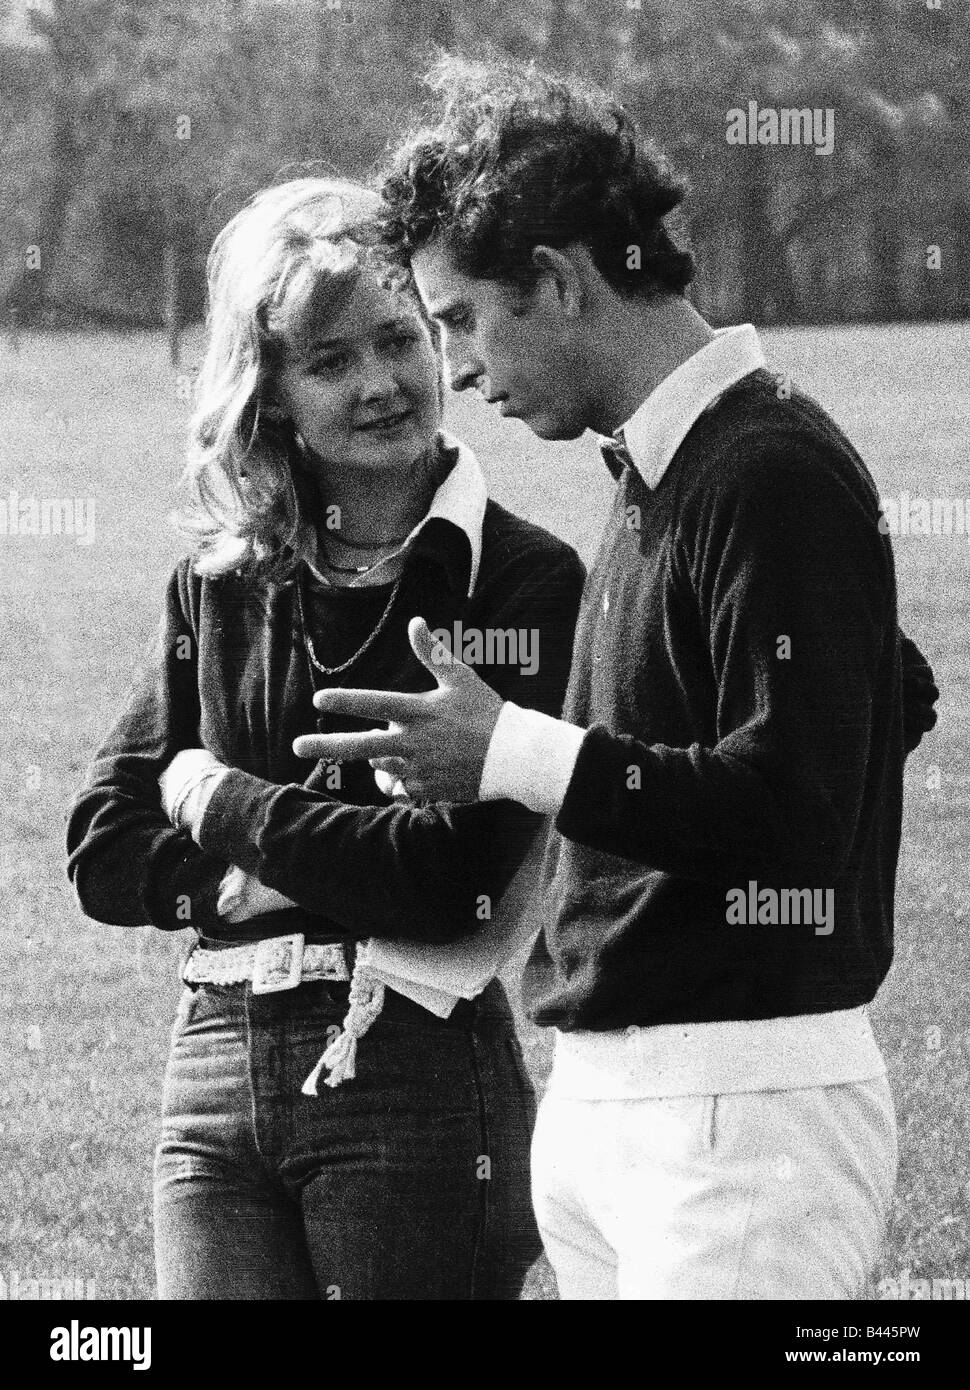 Prince Charles Prince of Wales with former girlfriend Jane Ward assistant manager of the Guards Polo Club at Windsor May 1978 Stock Photo